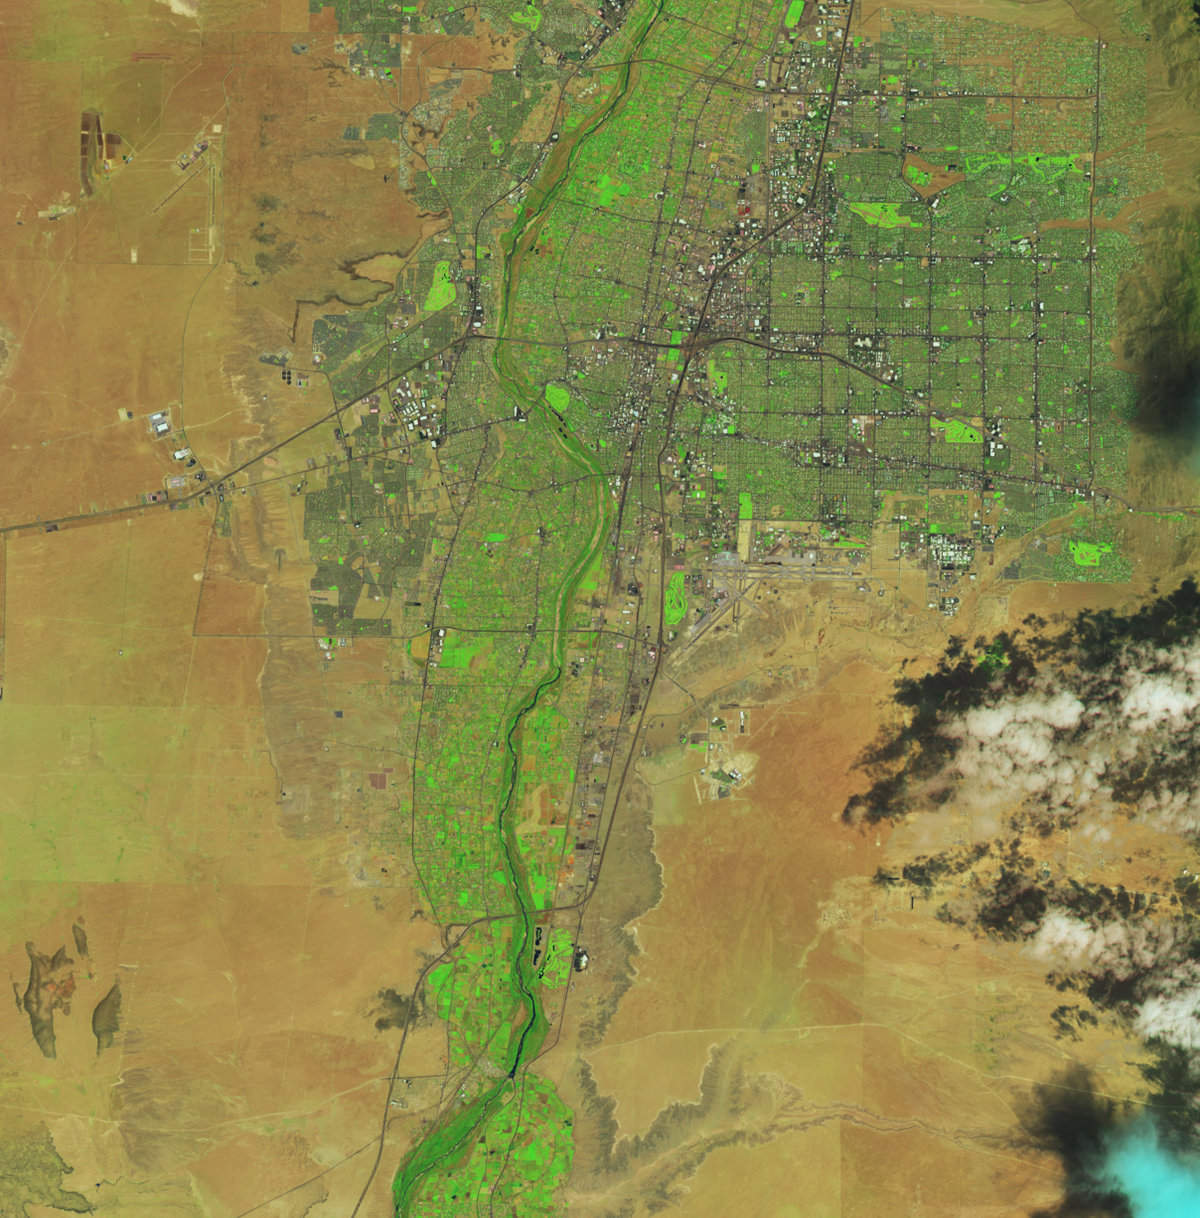 Satellite image of Rio Grande showing dry stretch through Albuquerque on July 25, 2022.